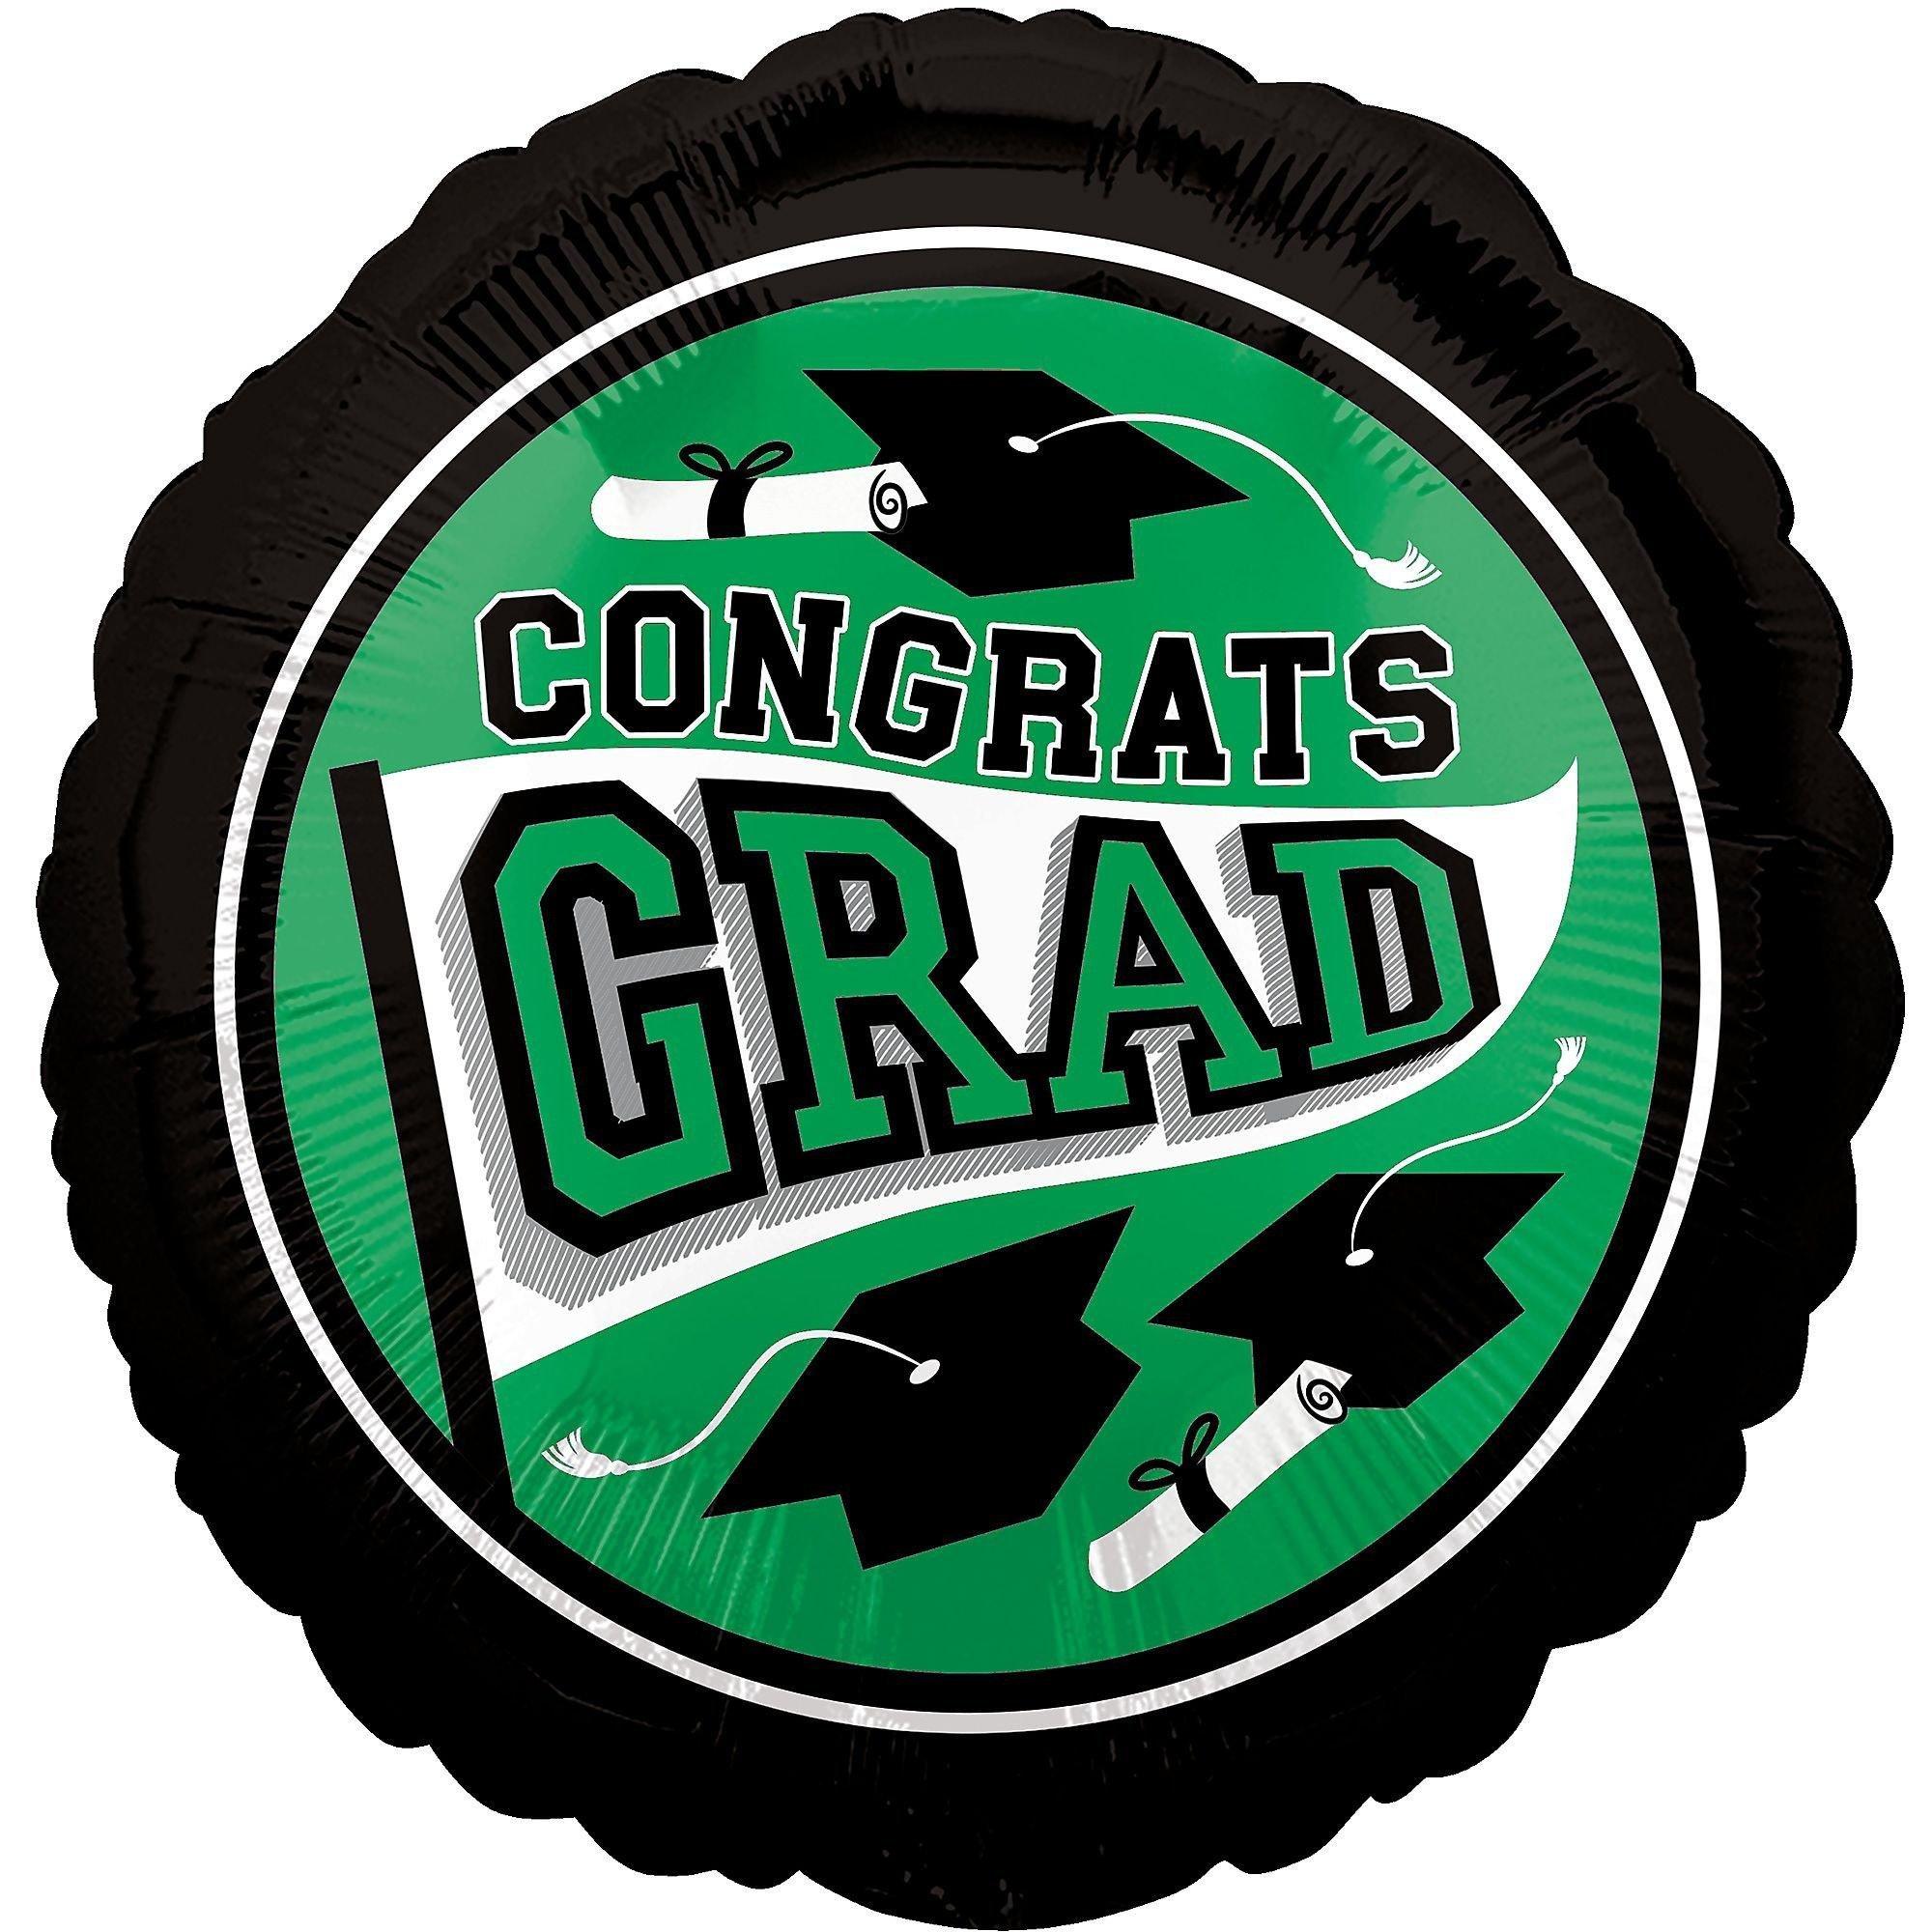 Graduation Party Decorations Kit with Banners, Balloons, Centerpiece, Streamers - Green 2024 Congrats Grad